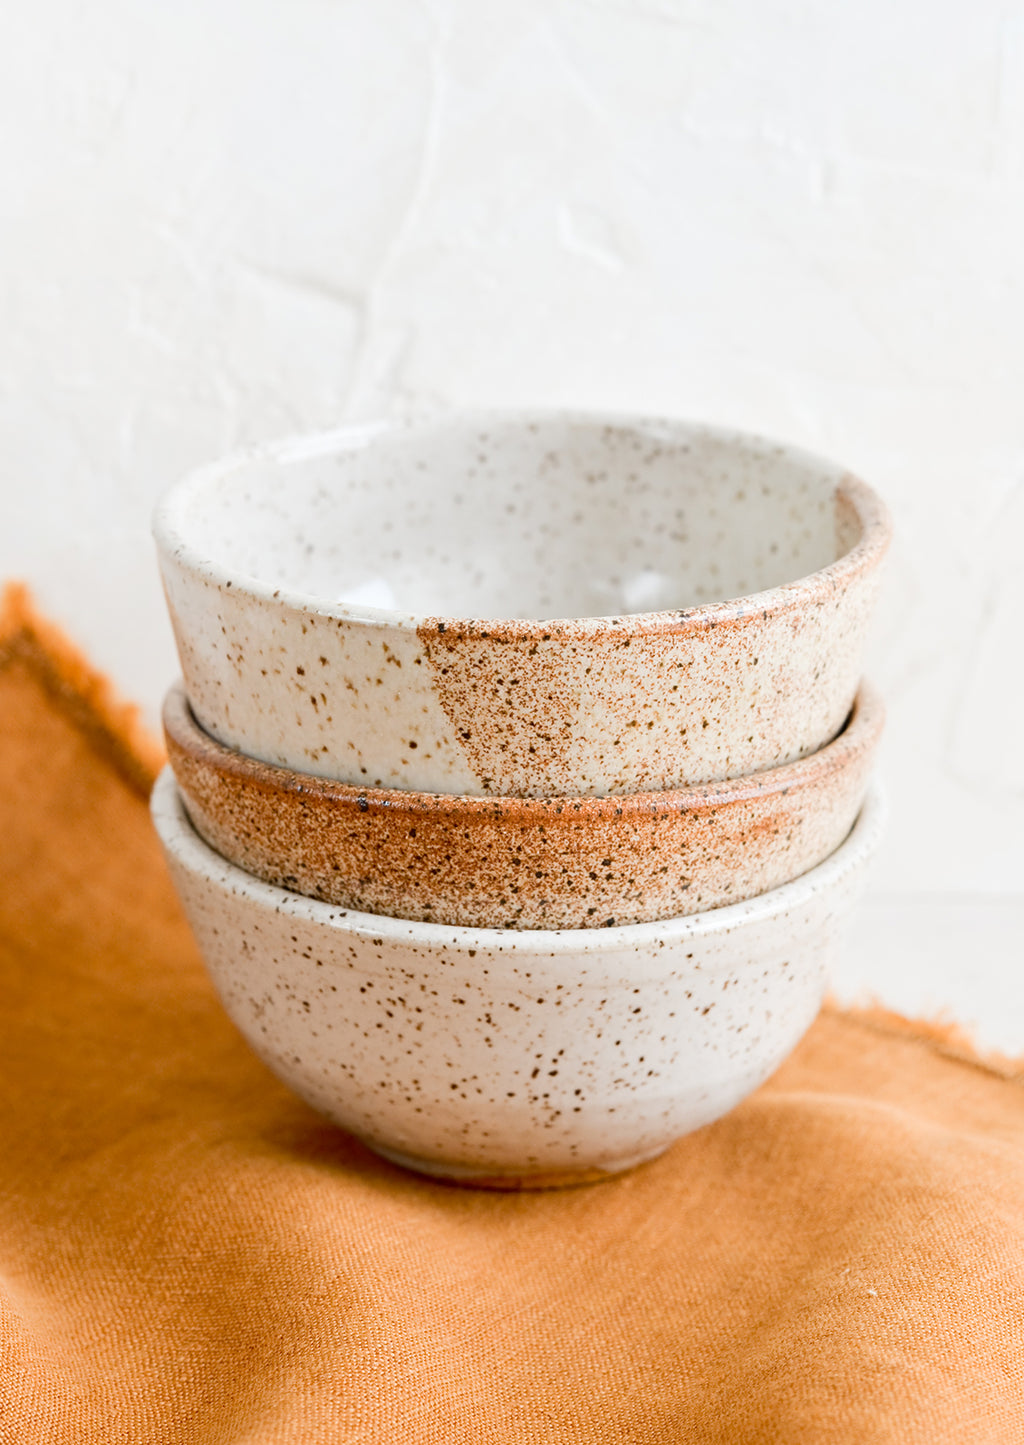 1: A stack of three small speckled ceramic bowls.